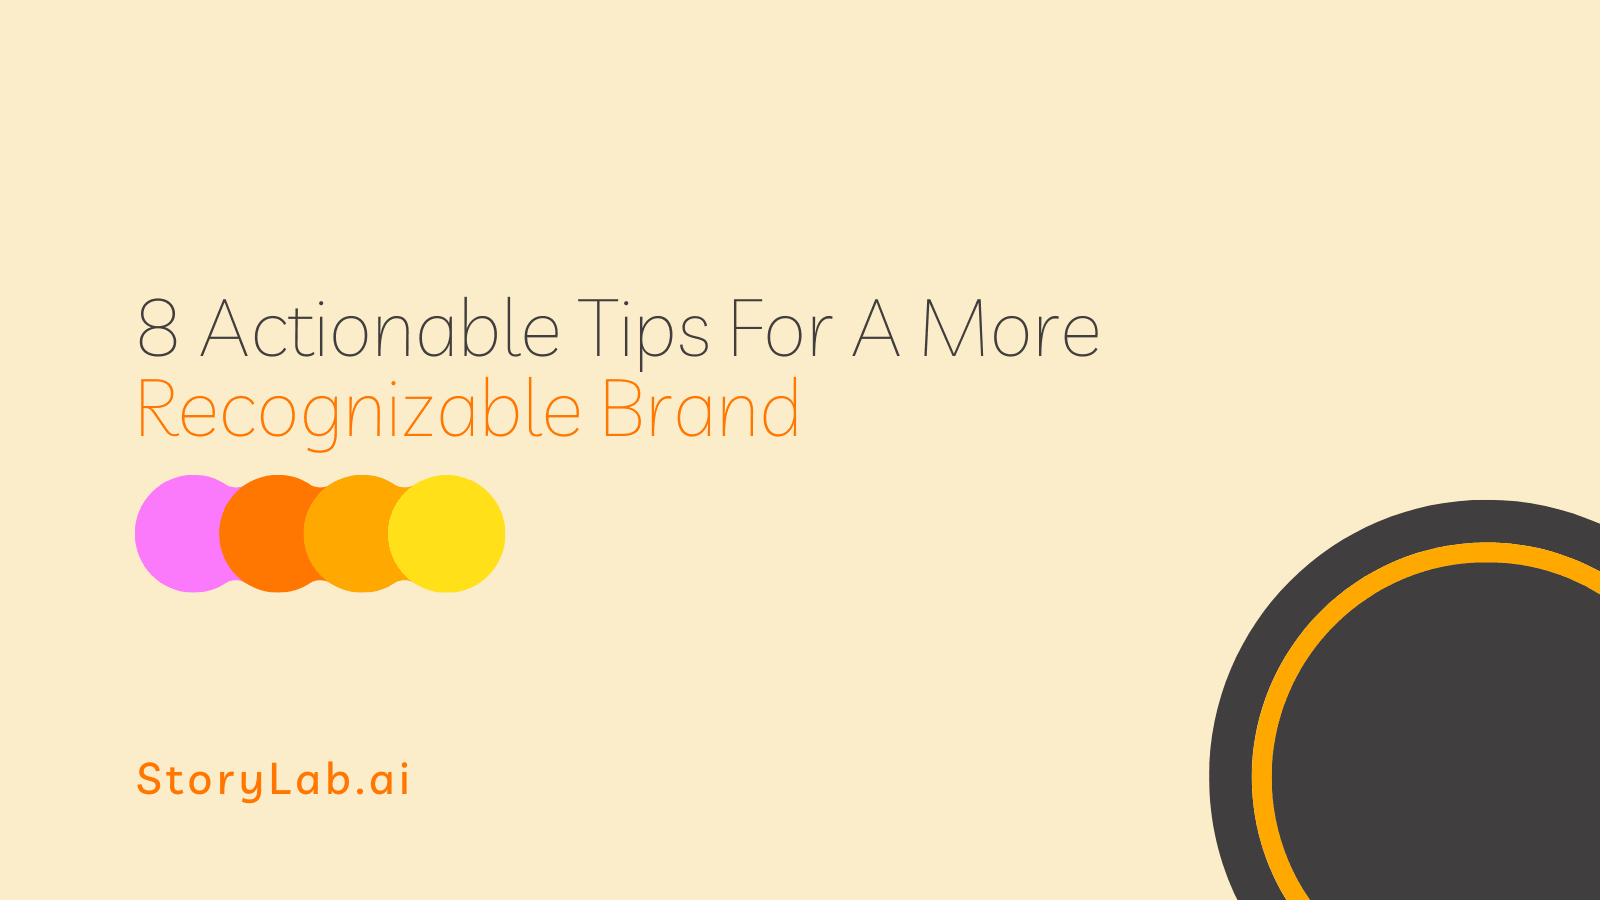 8 Actionable Tips For A More Recognizable Brand